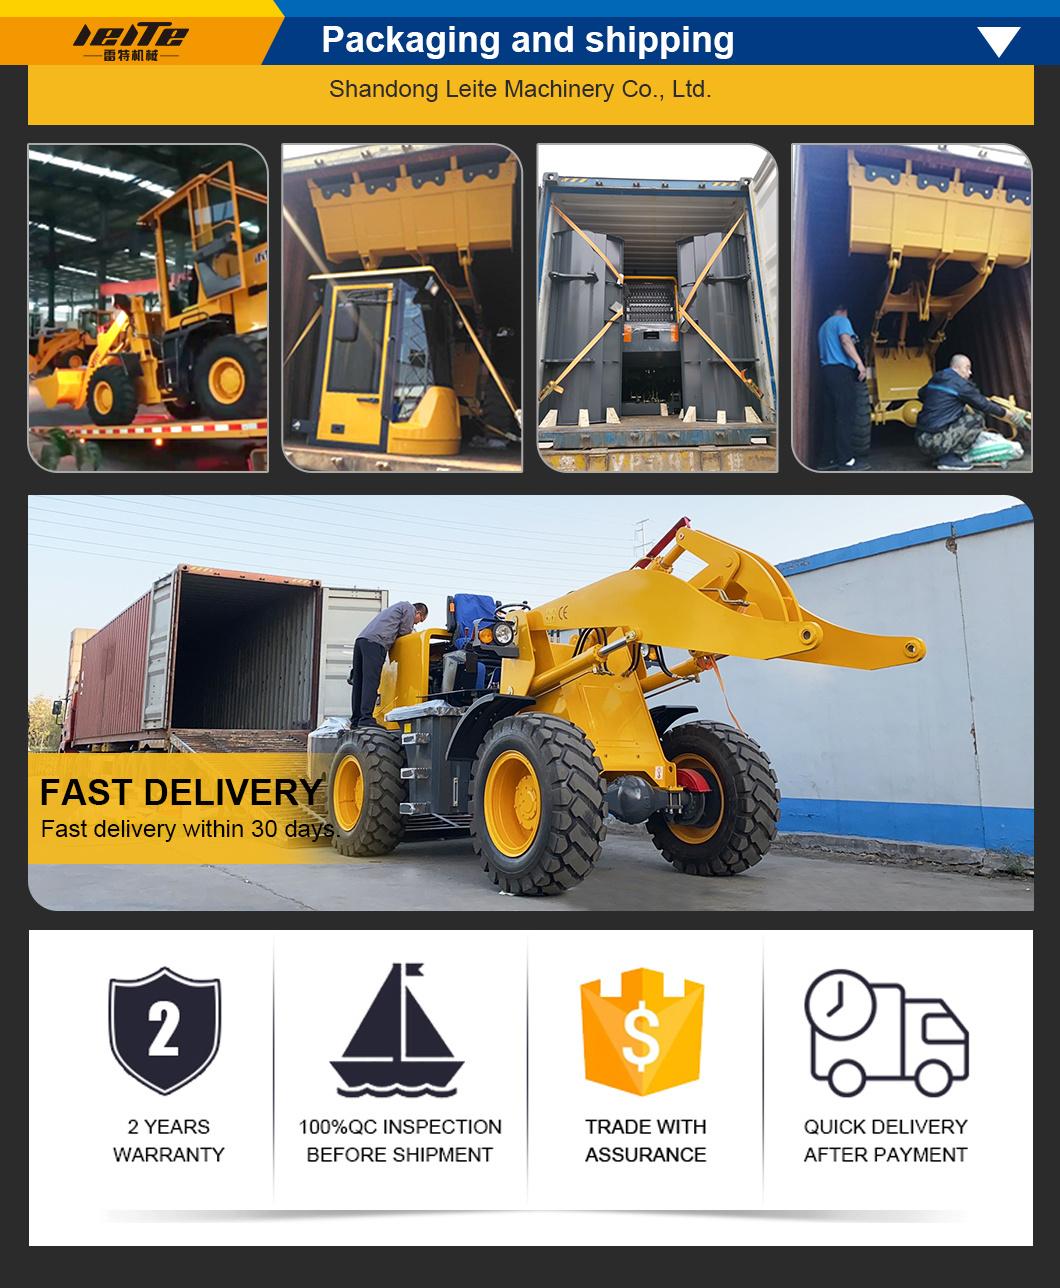 Construction Machinery 5 Tons Small Wheel Loader with Good Quality for Sale